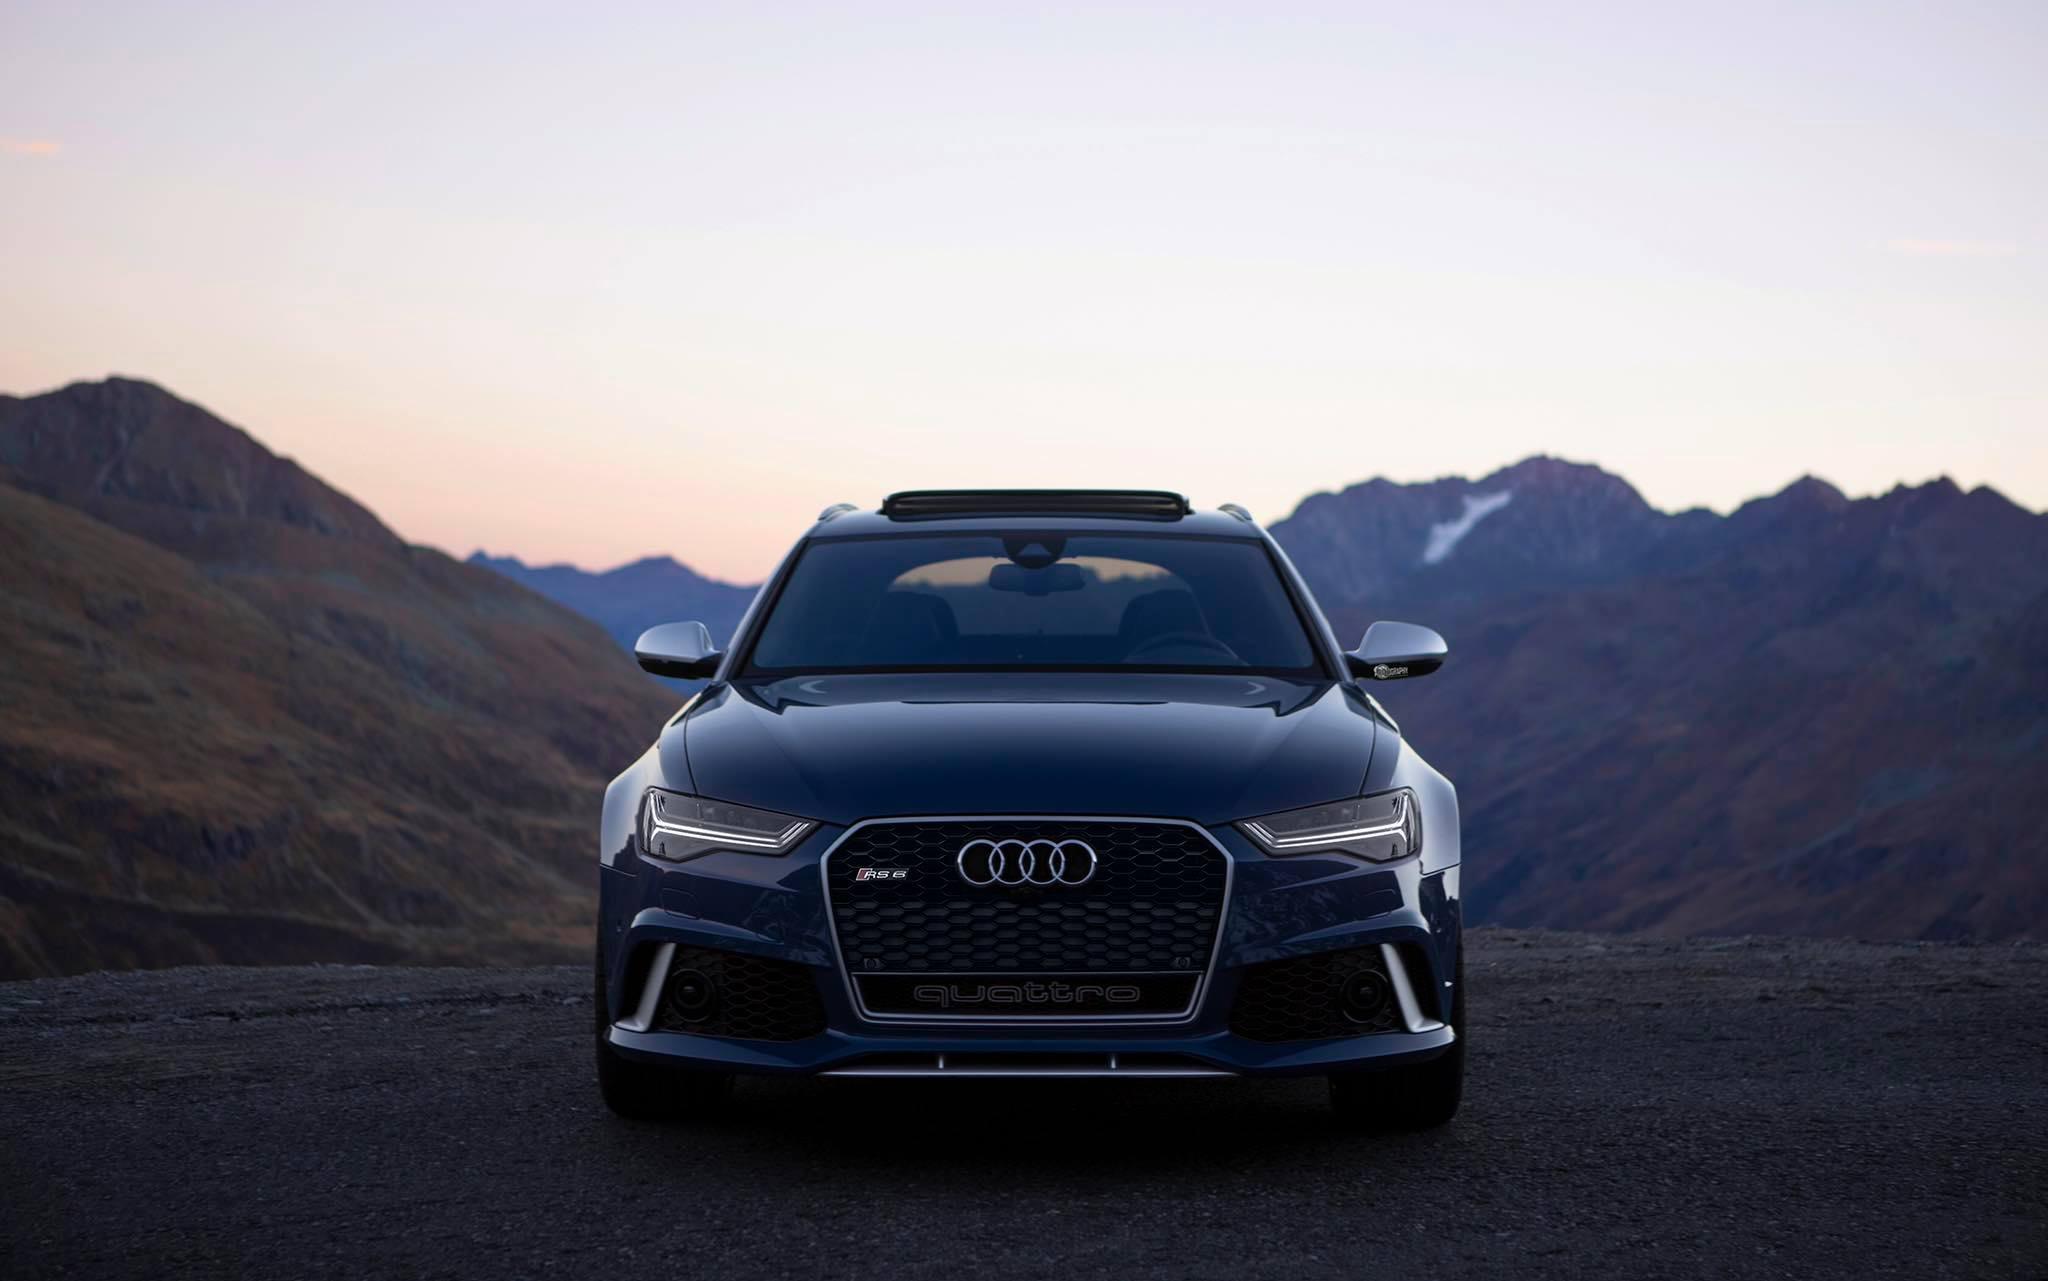 Auditography Unique Audi Photography The 612hp Rs6 Avant